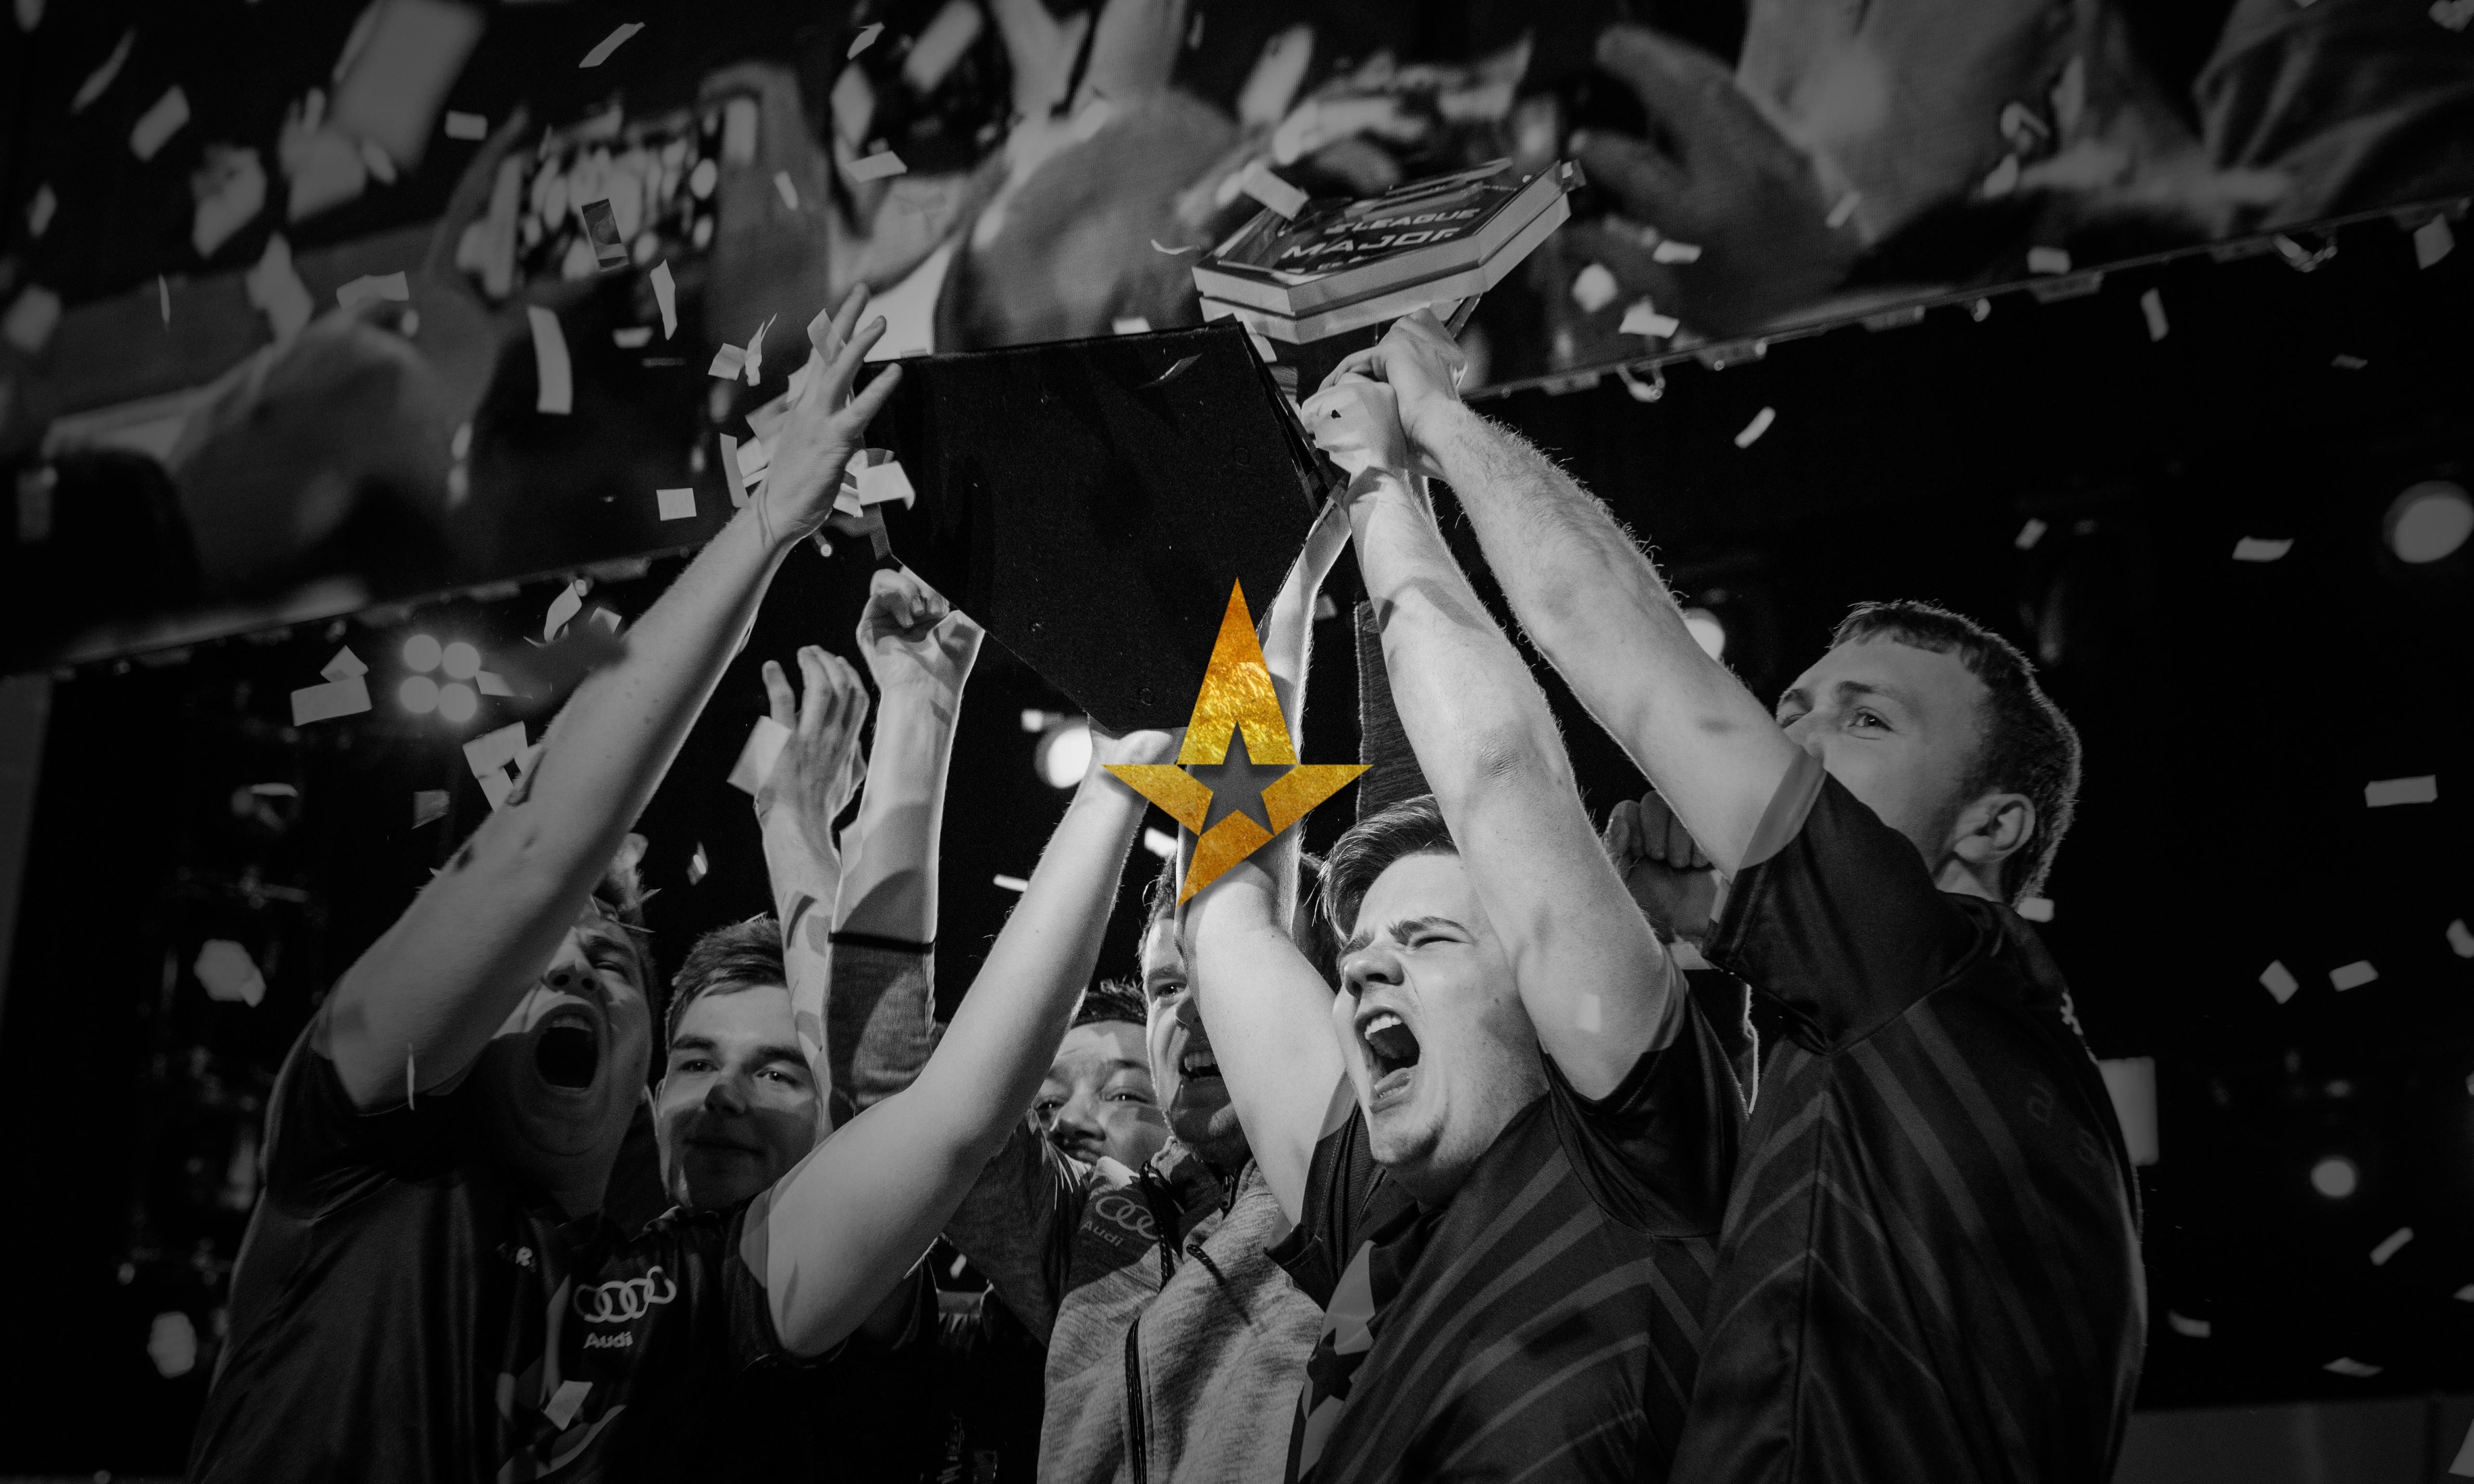 I made a wallpaper from Astralis' winning moment at the major #games